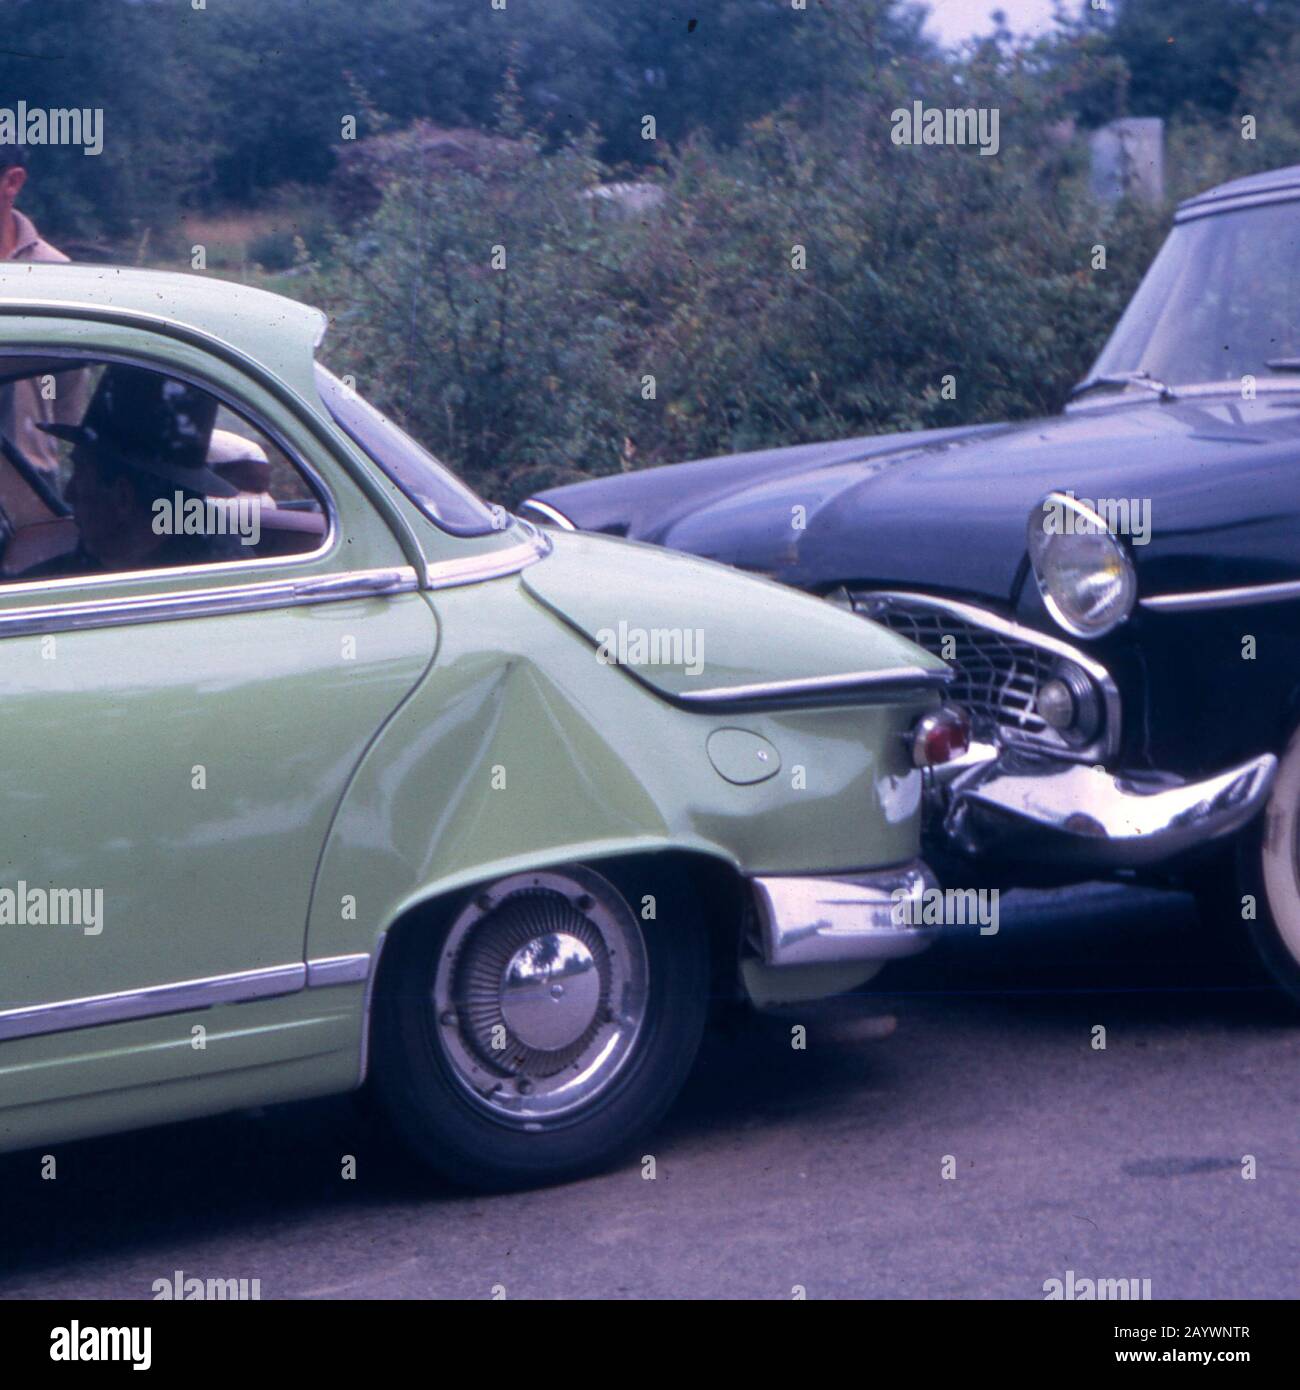 Accident of vintage cars, bumpers crashed between two old cars, France Stock Photo